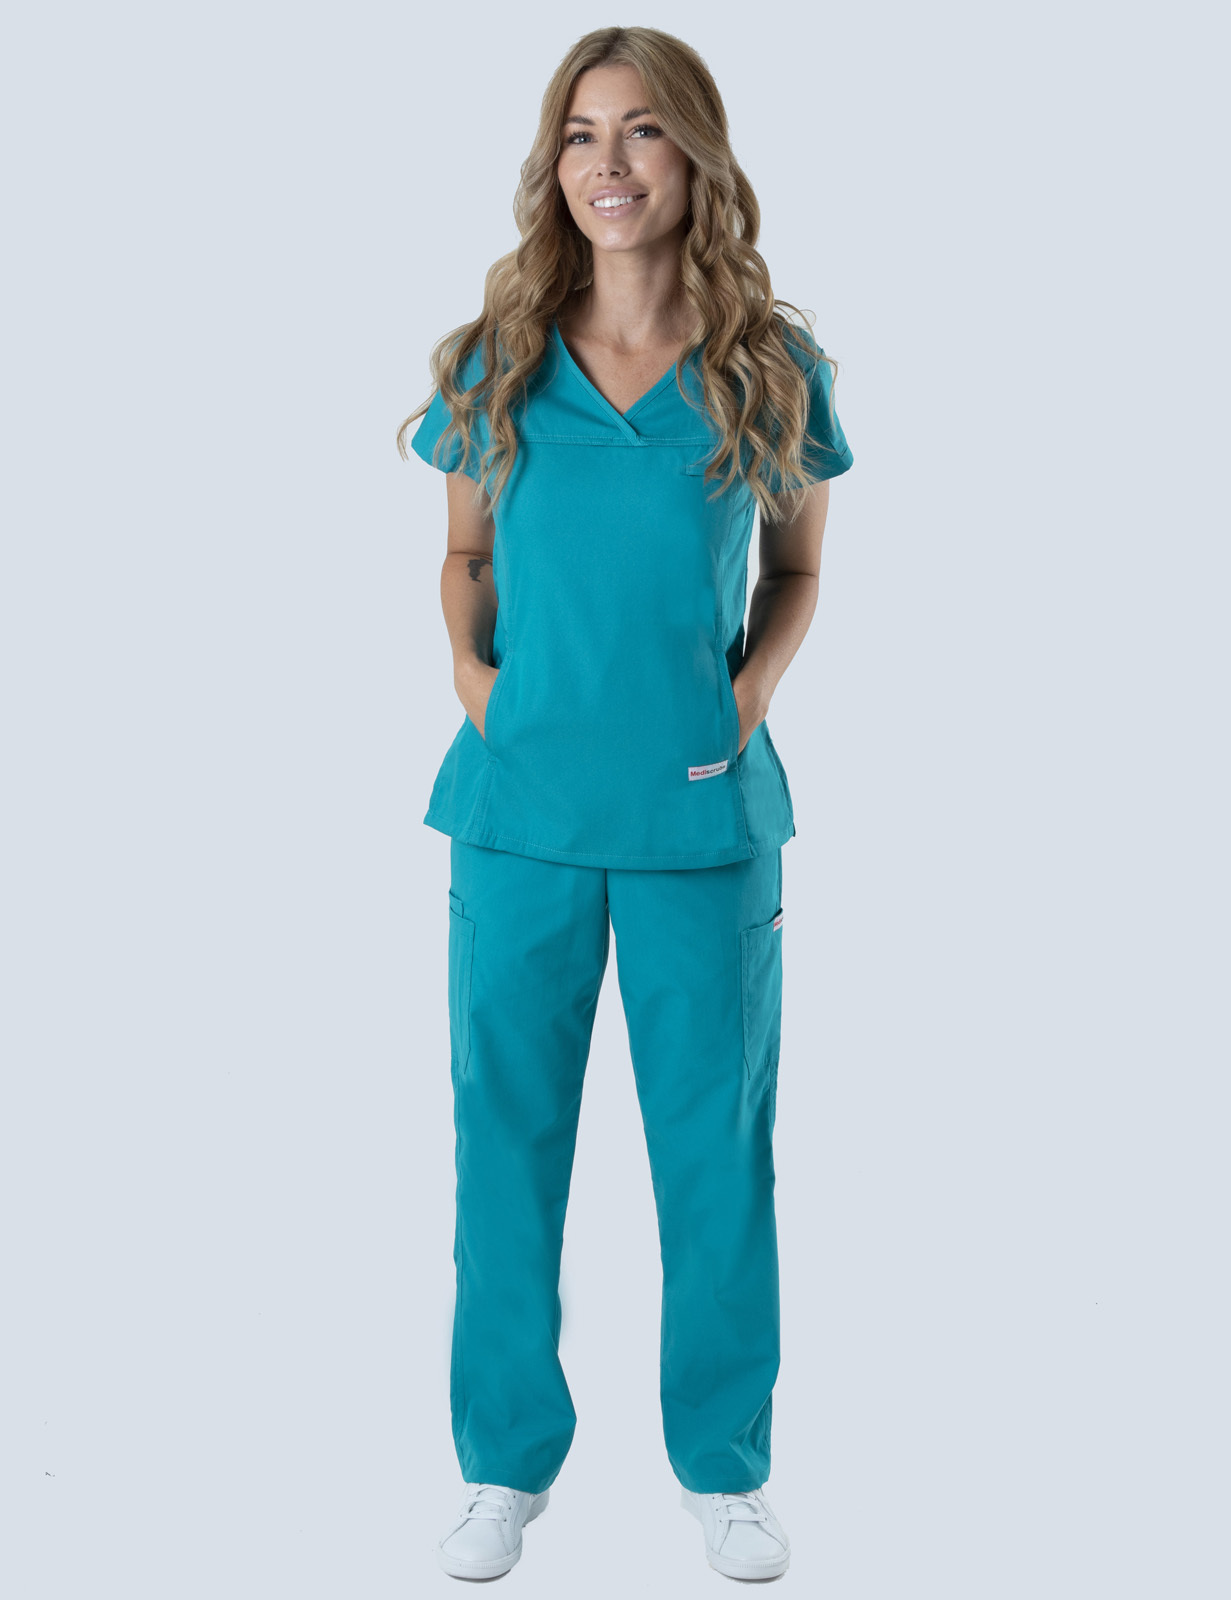 ECT Anaesthetic Technician Uniform Set Bundle (Women's Fit Solid Top and Cargo Pants in Teal + Logos)